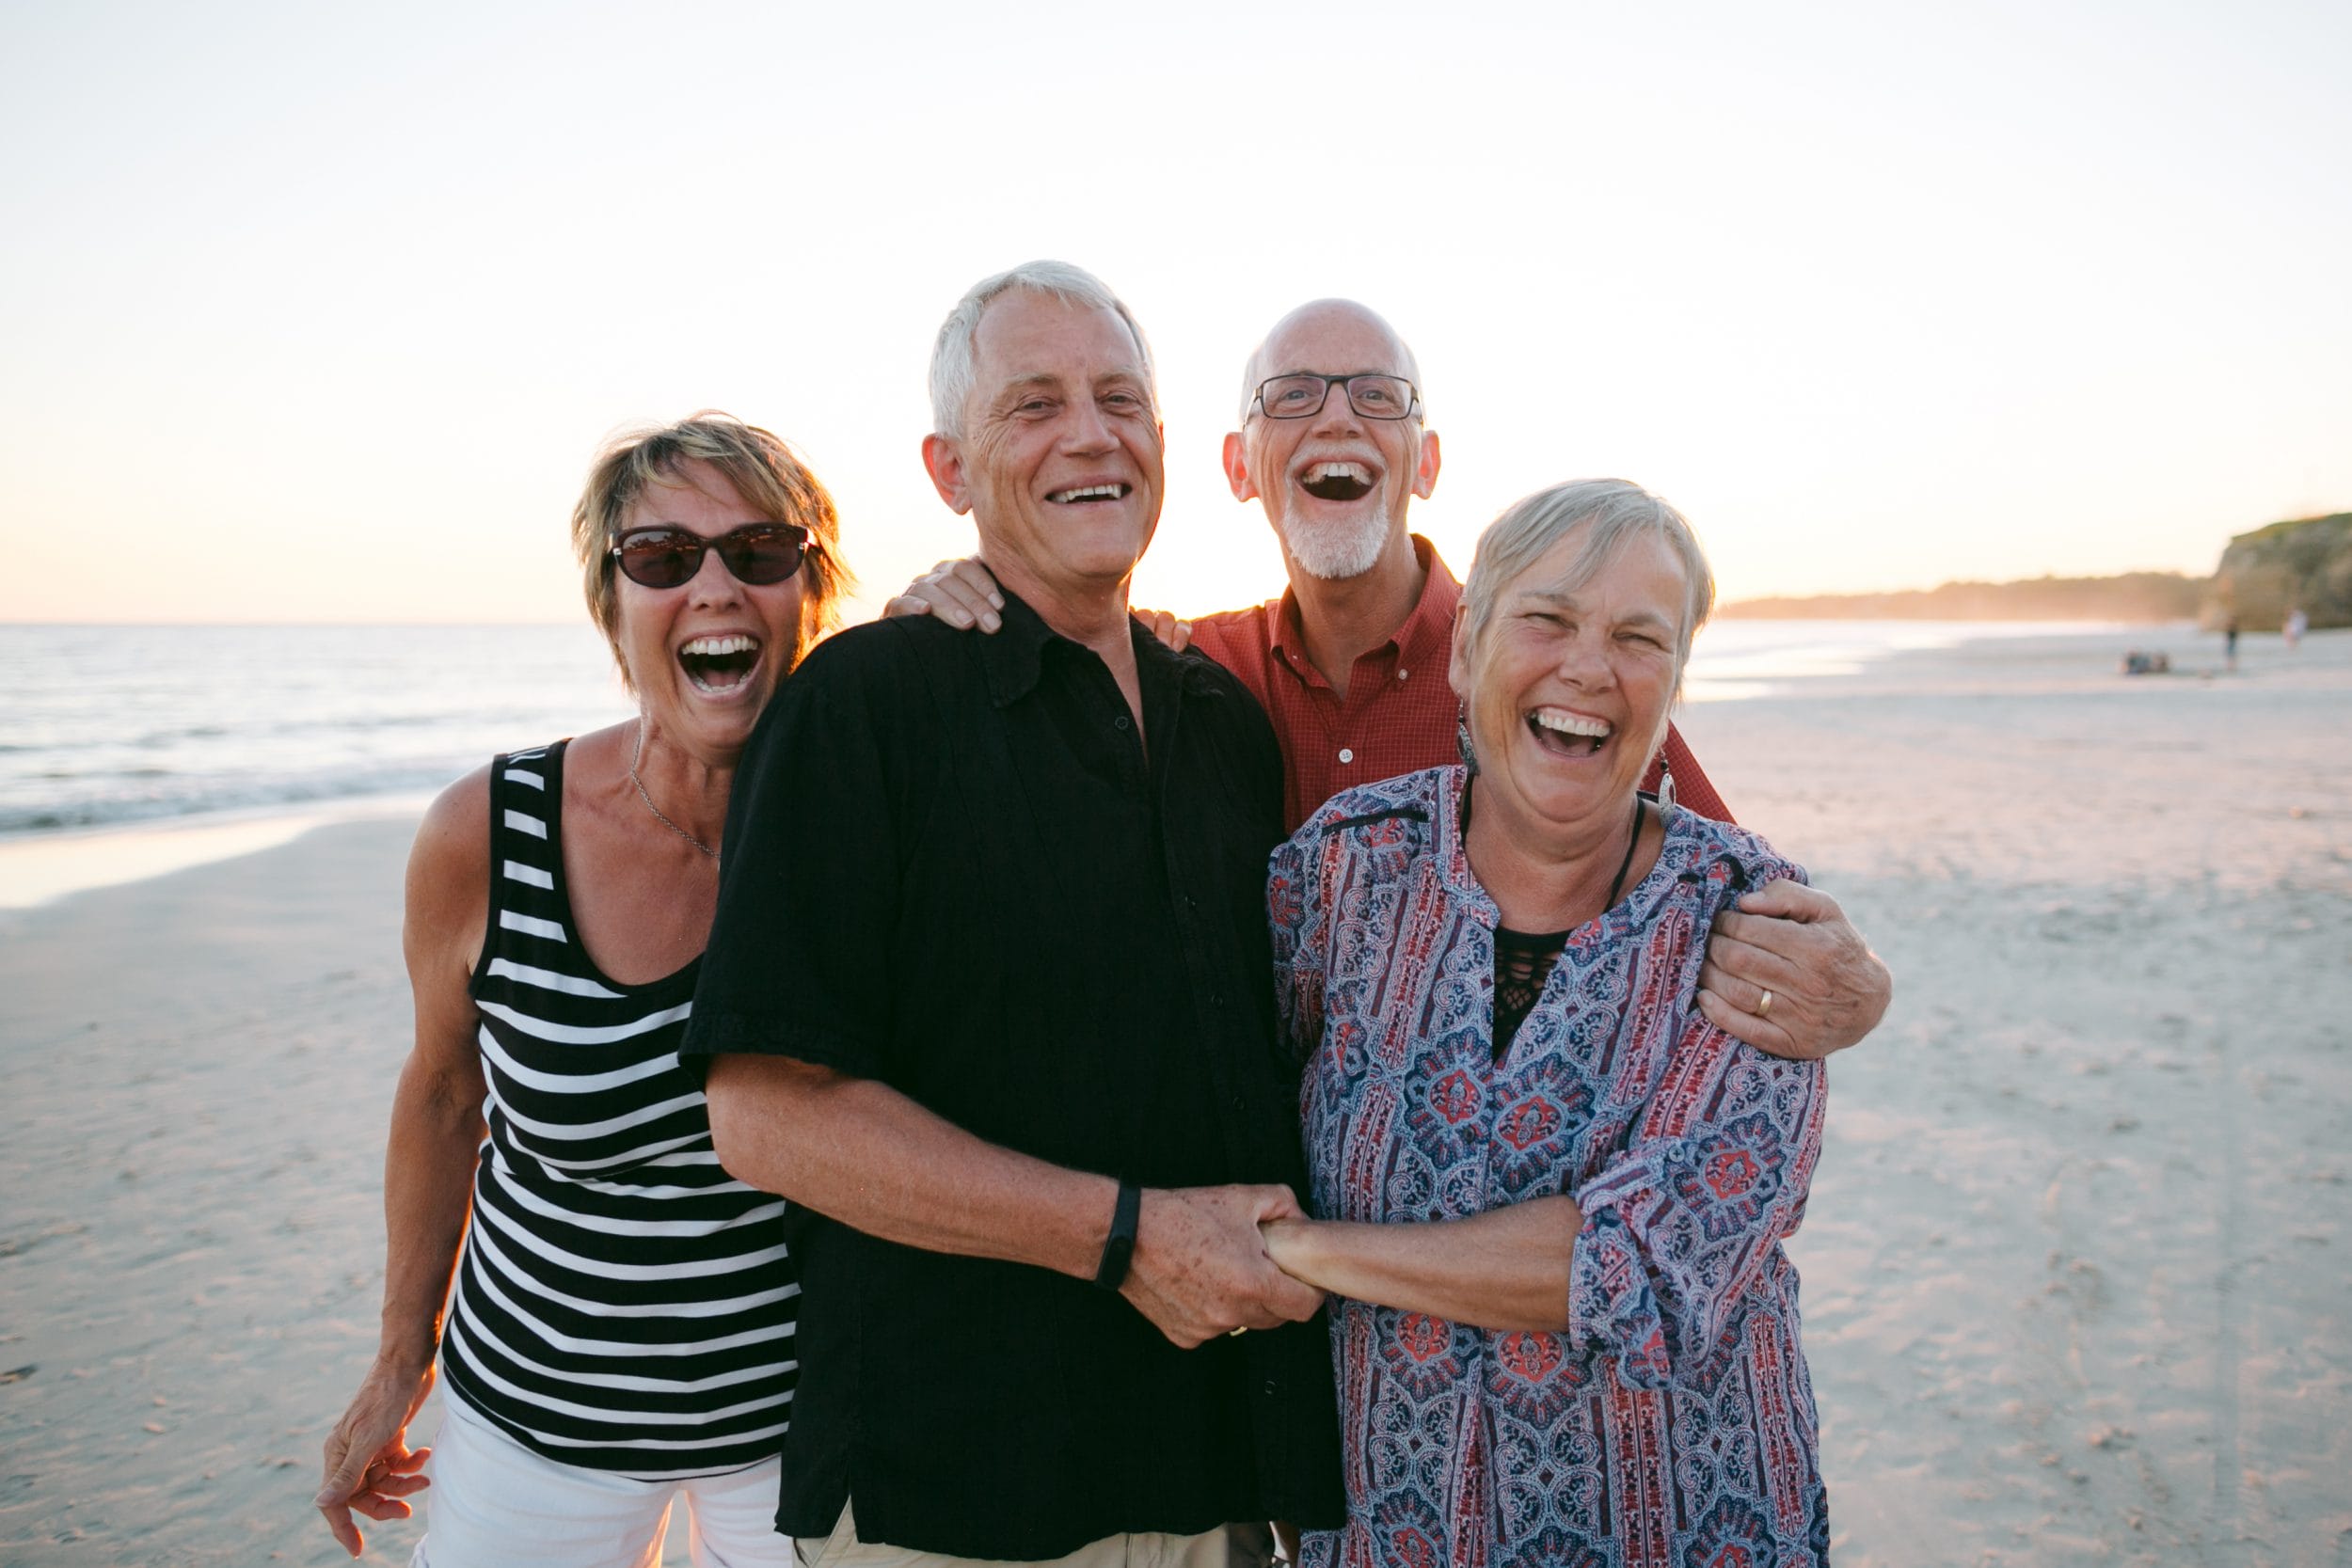 group of older adults laughing and embracing on beach